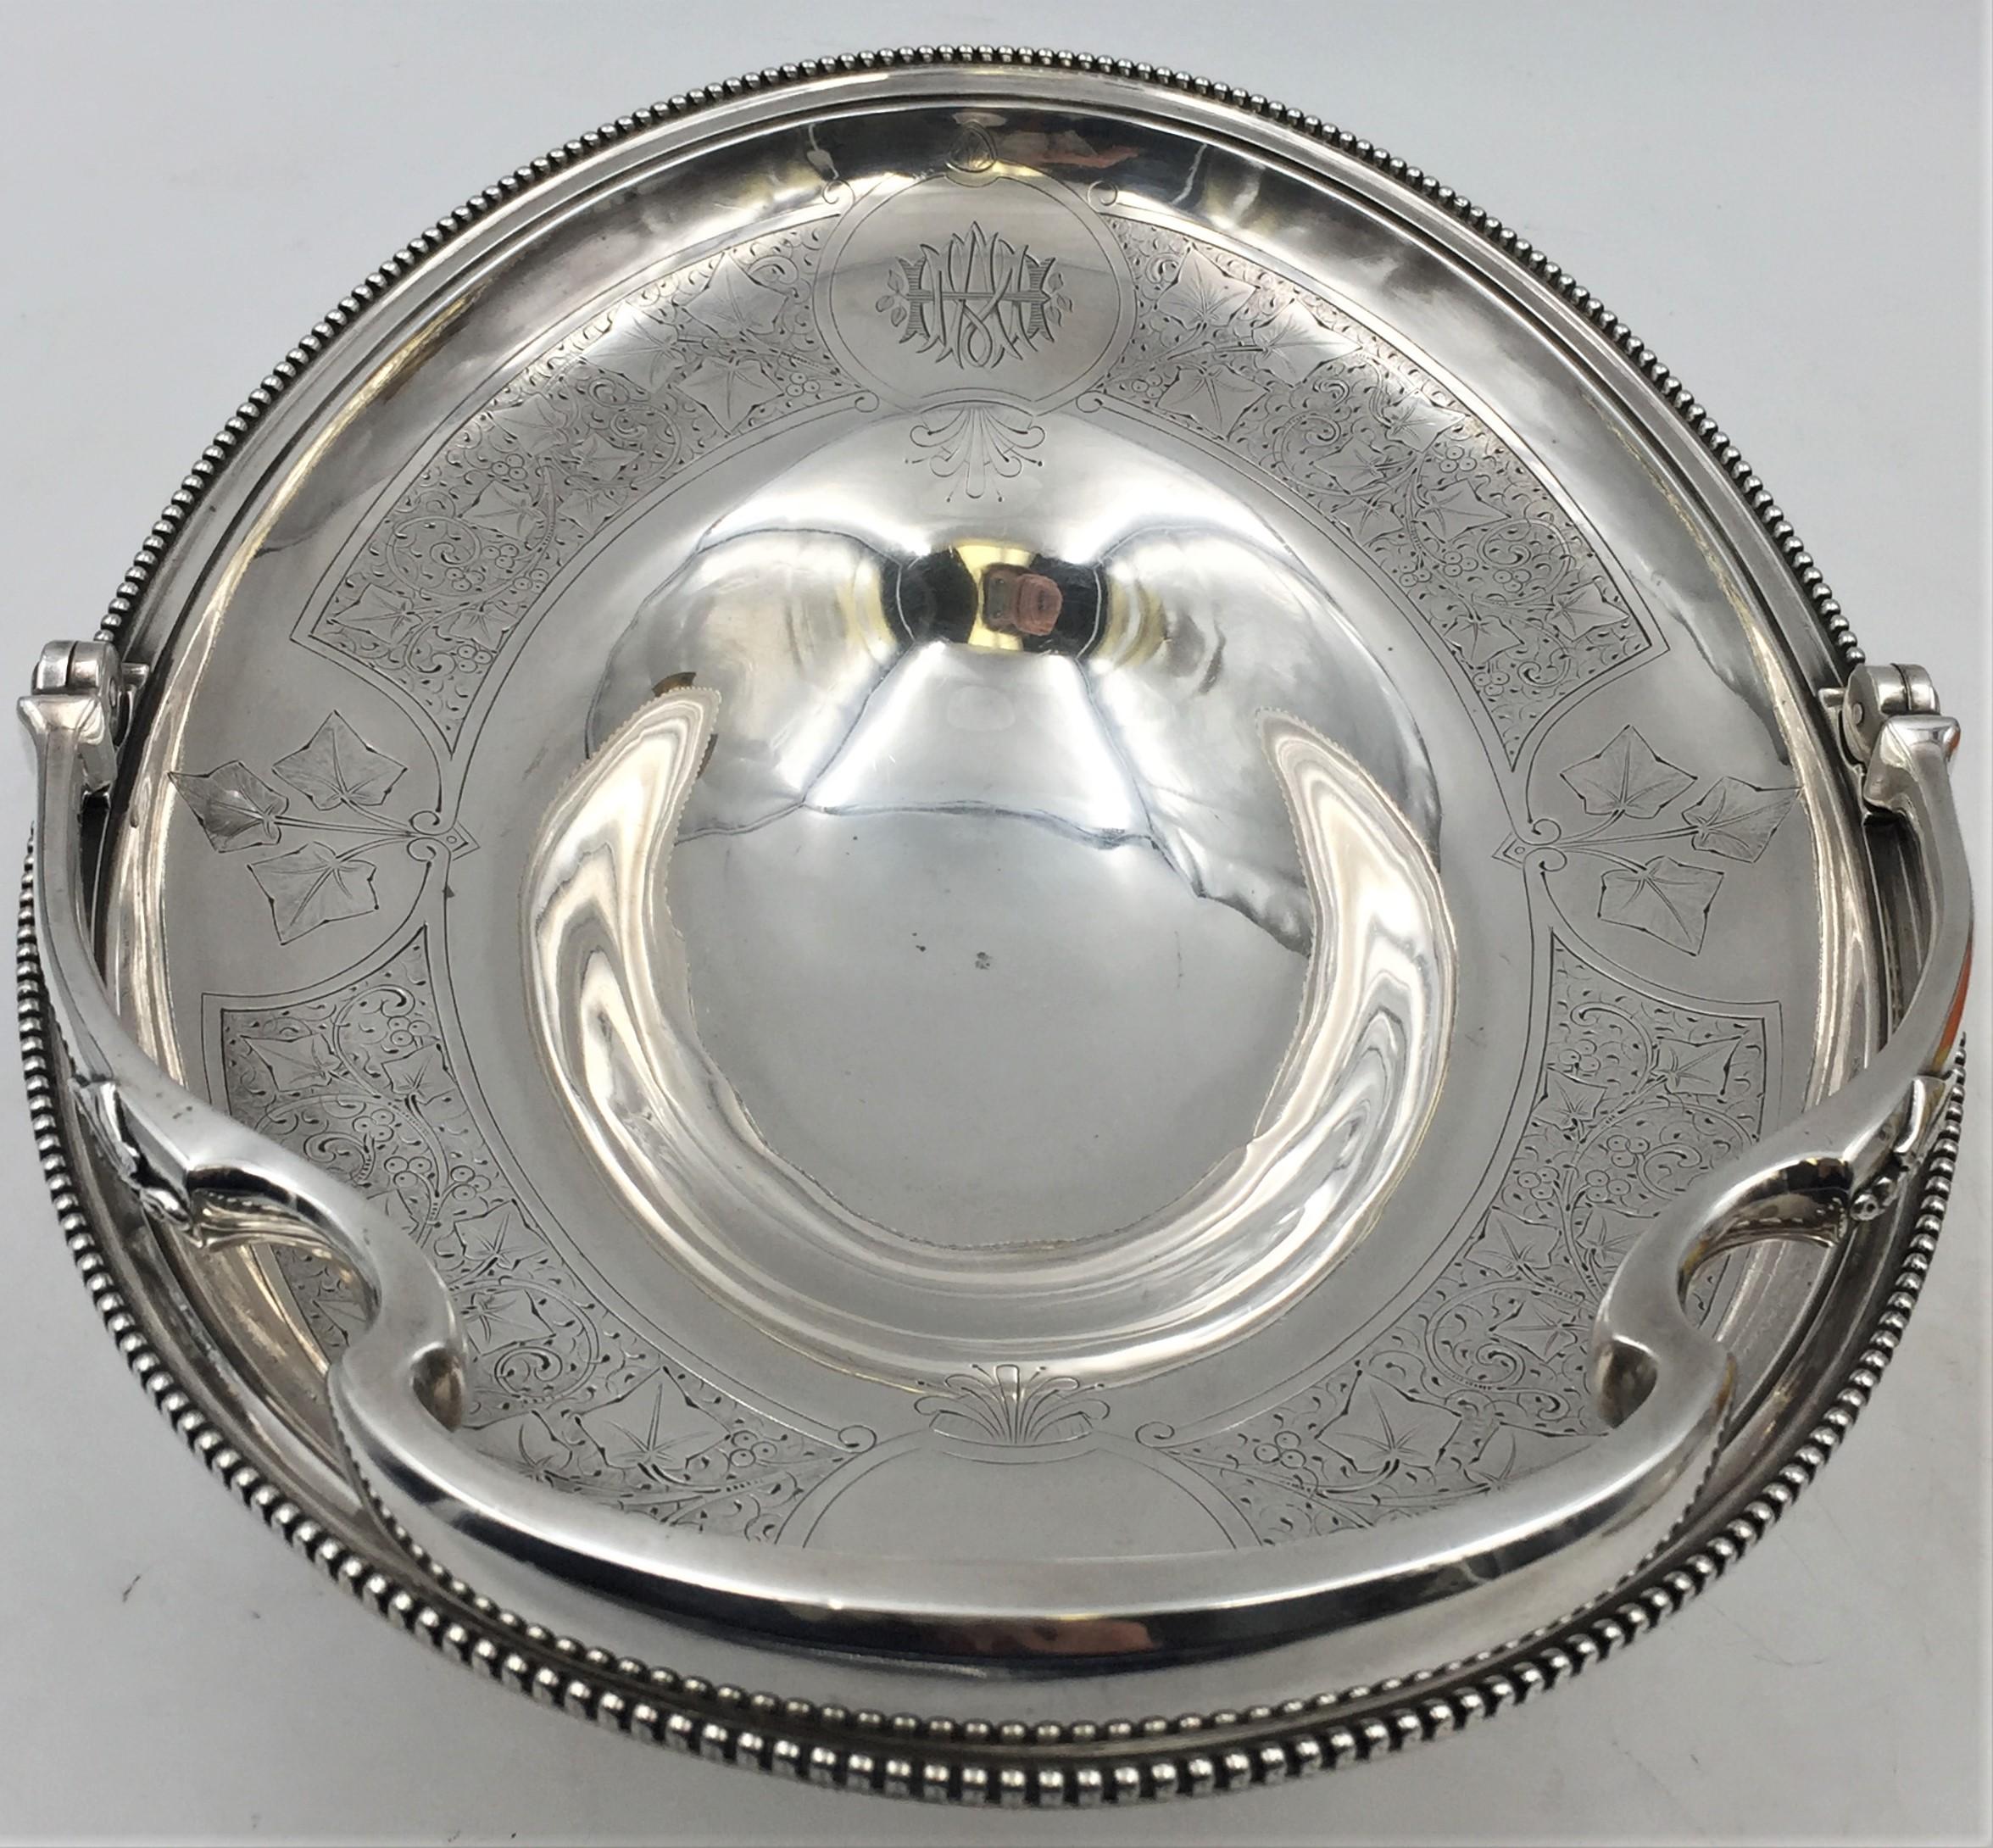 Tiffany & Co. 1860s Sterling Silver Basket Centerpiece Bowl In Good Condition For Sale In New York, NY